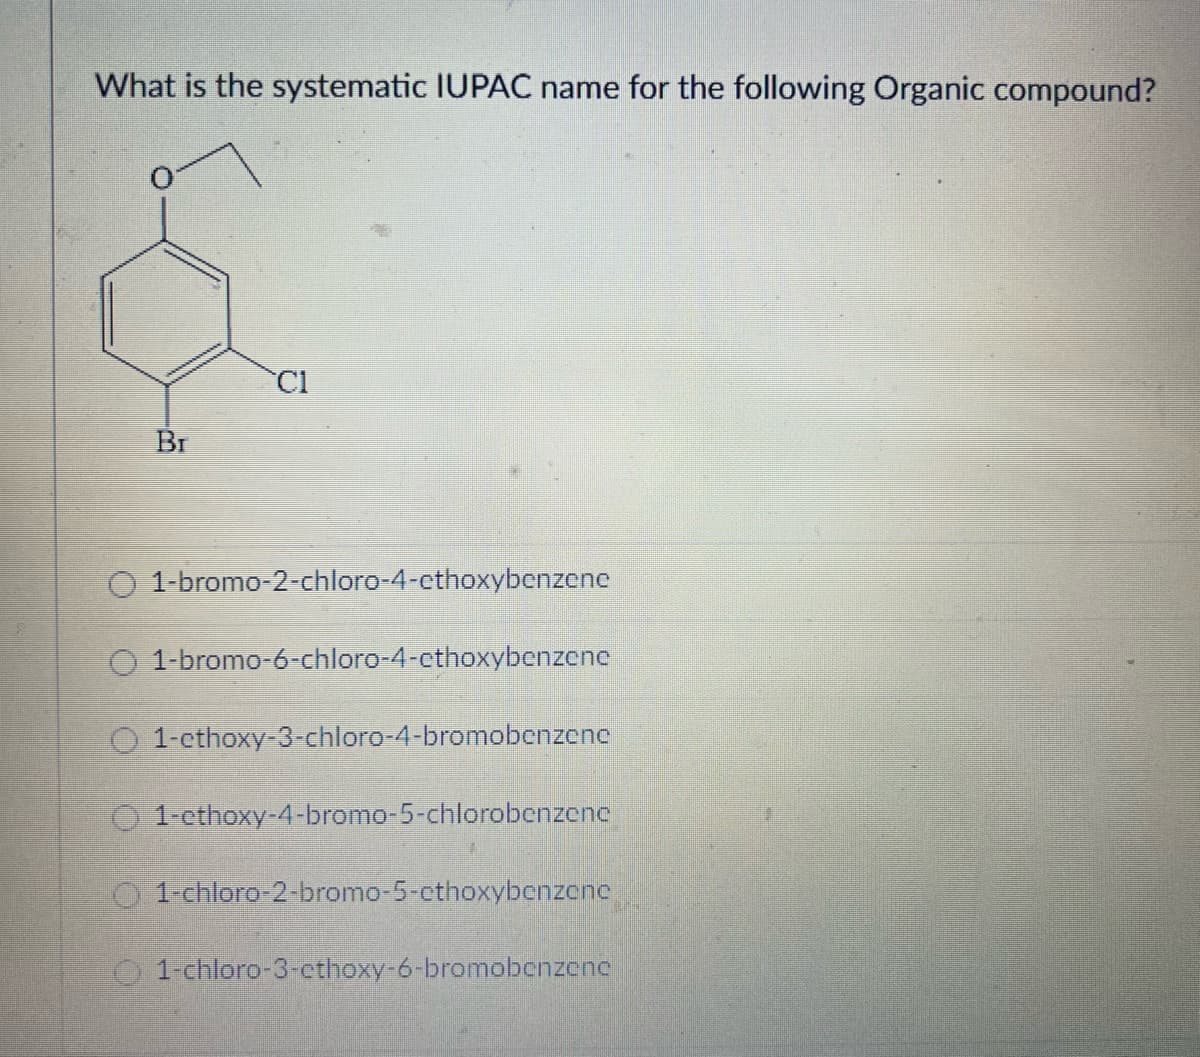 What is the systematic IUPAC name for the following Organic compound?
Br
CI
1-bromo-2-chloro-4-ethoxybenzene
O 1-bromo-6-chloro-4-cthoxybenzene
O 1-cthoxy-3-chloro-4-bromobenzene
O1-ethoxy-4-bromo-5-chlorobenzene
1-chloro-2-bromo-5-cthoxybenzene
1-chloro-3-ethoxy-6-bromobenzene